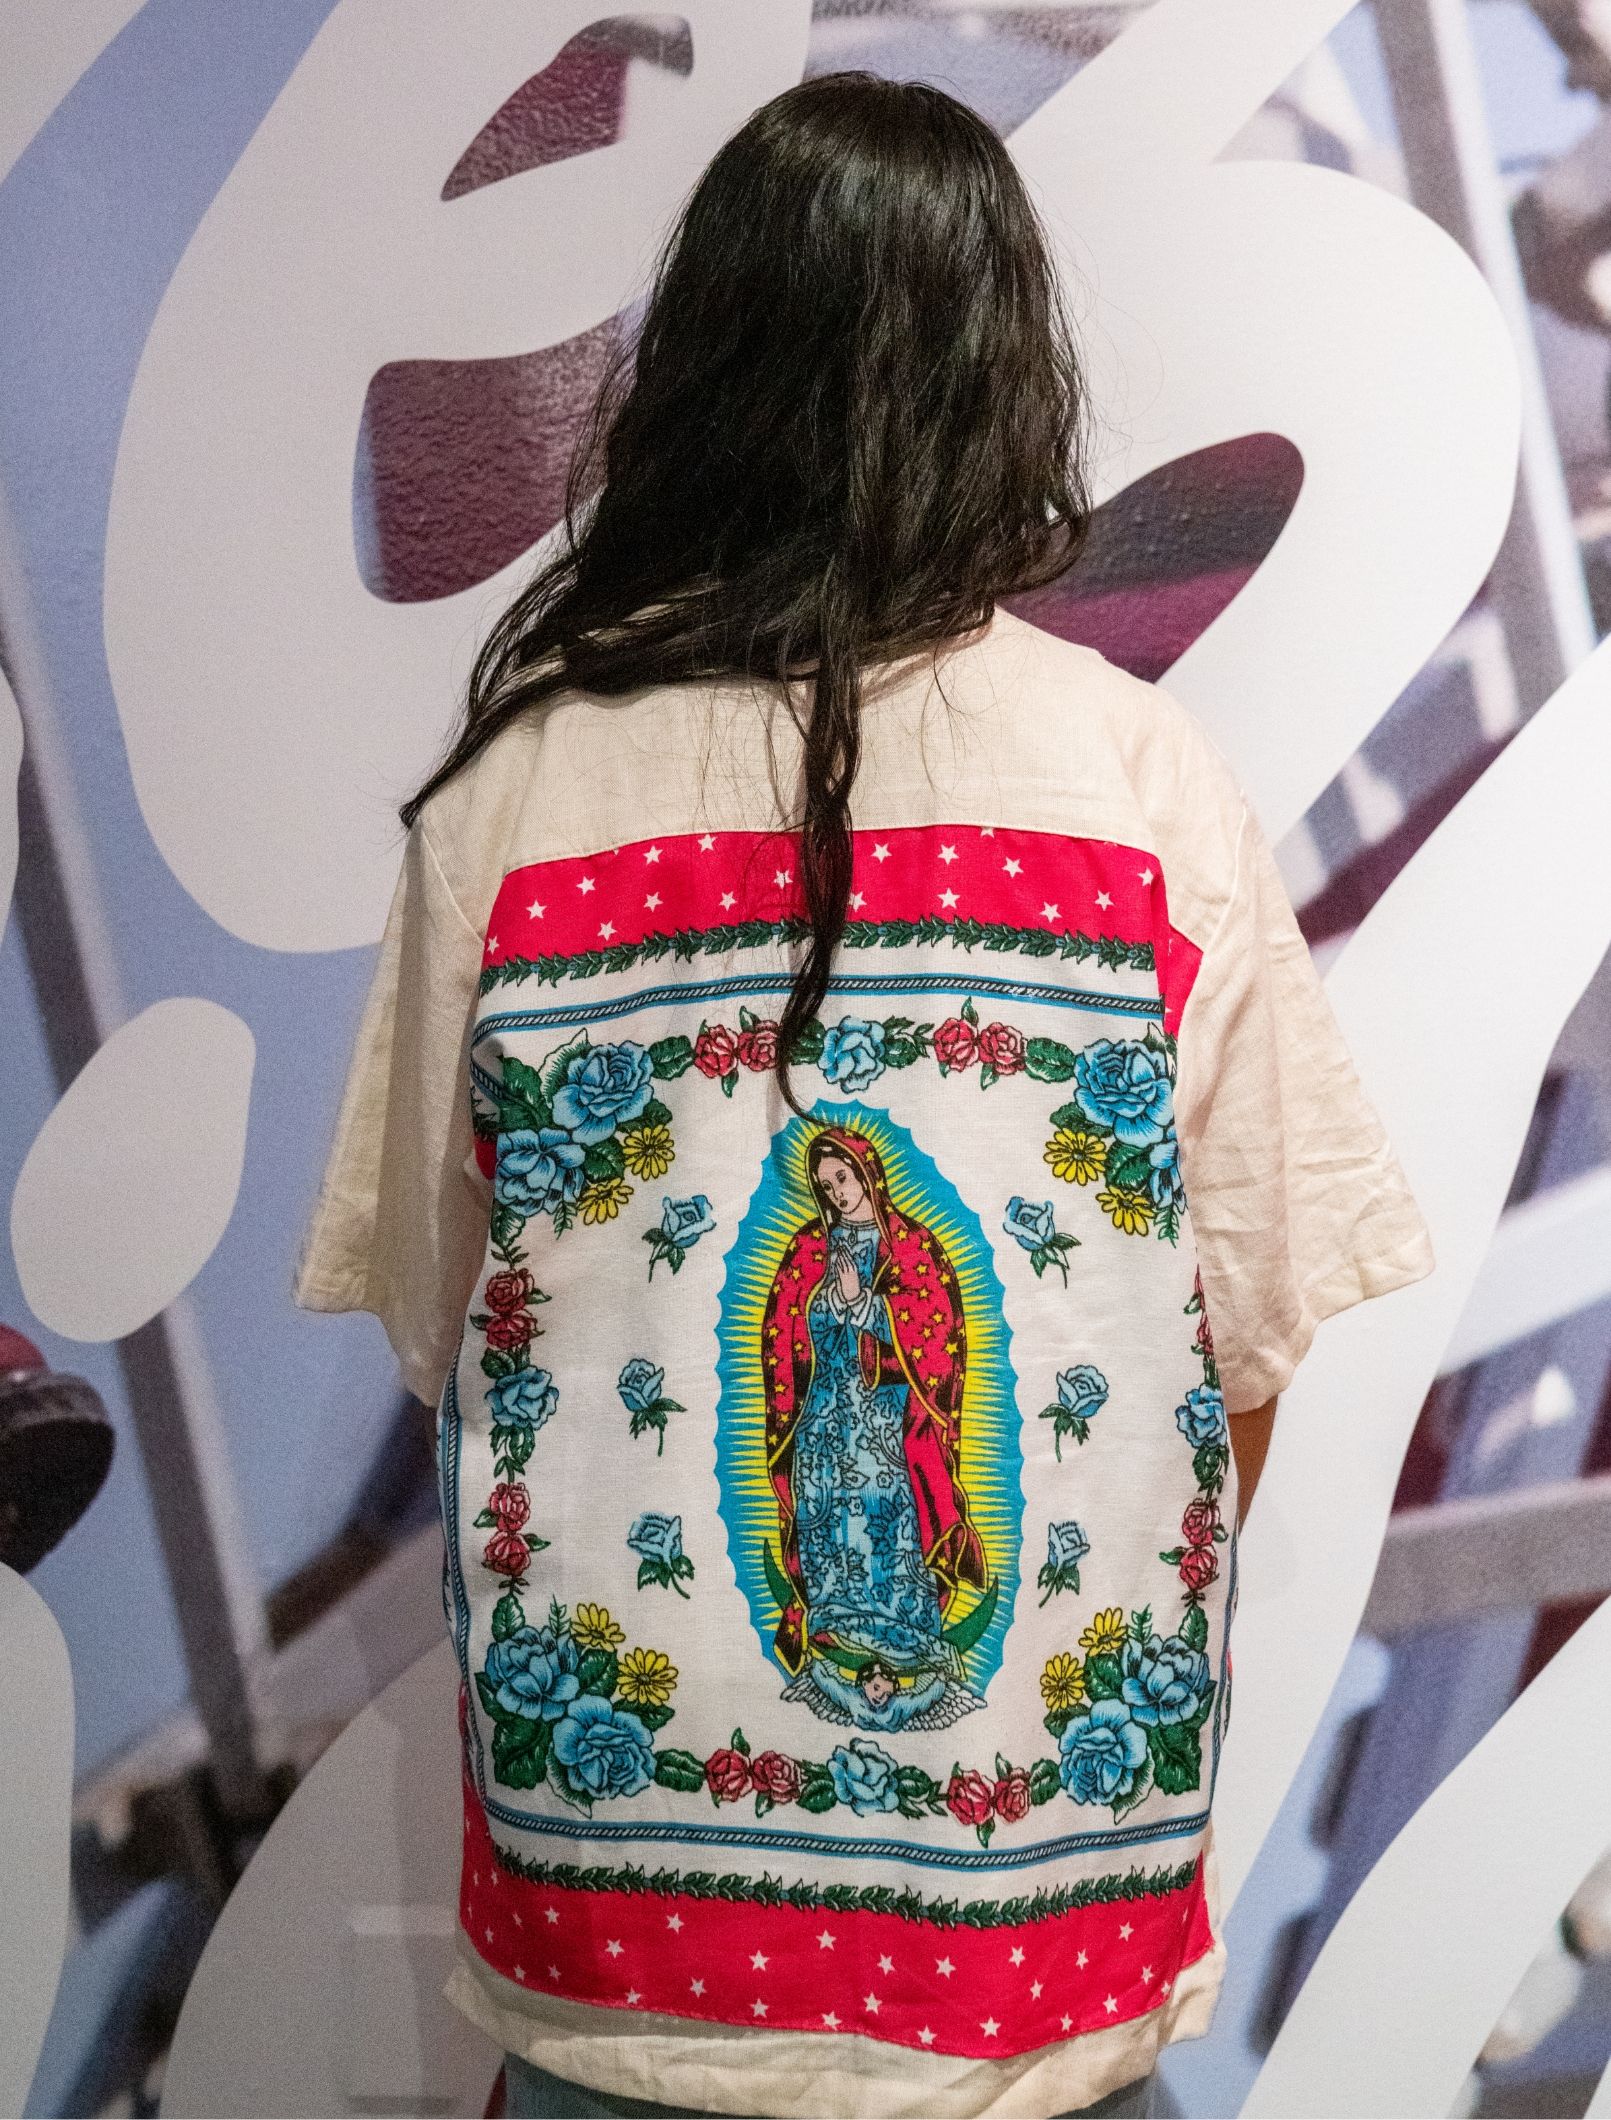 Back view of person posing facing gallery wall. Back of shirt has Mother Mary with roses surrounding her